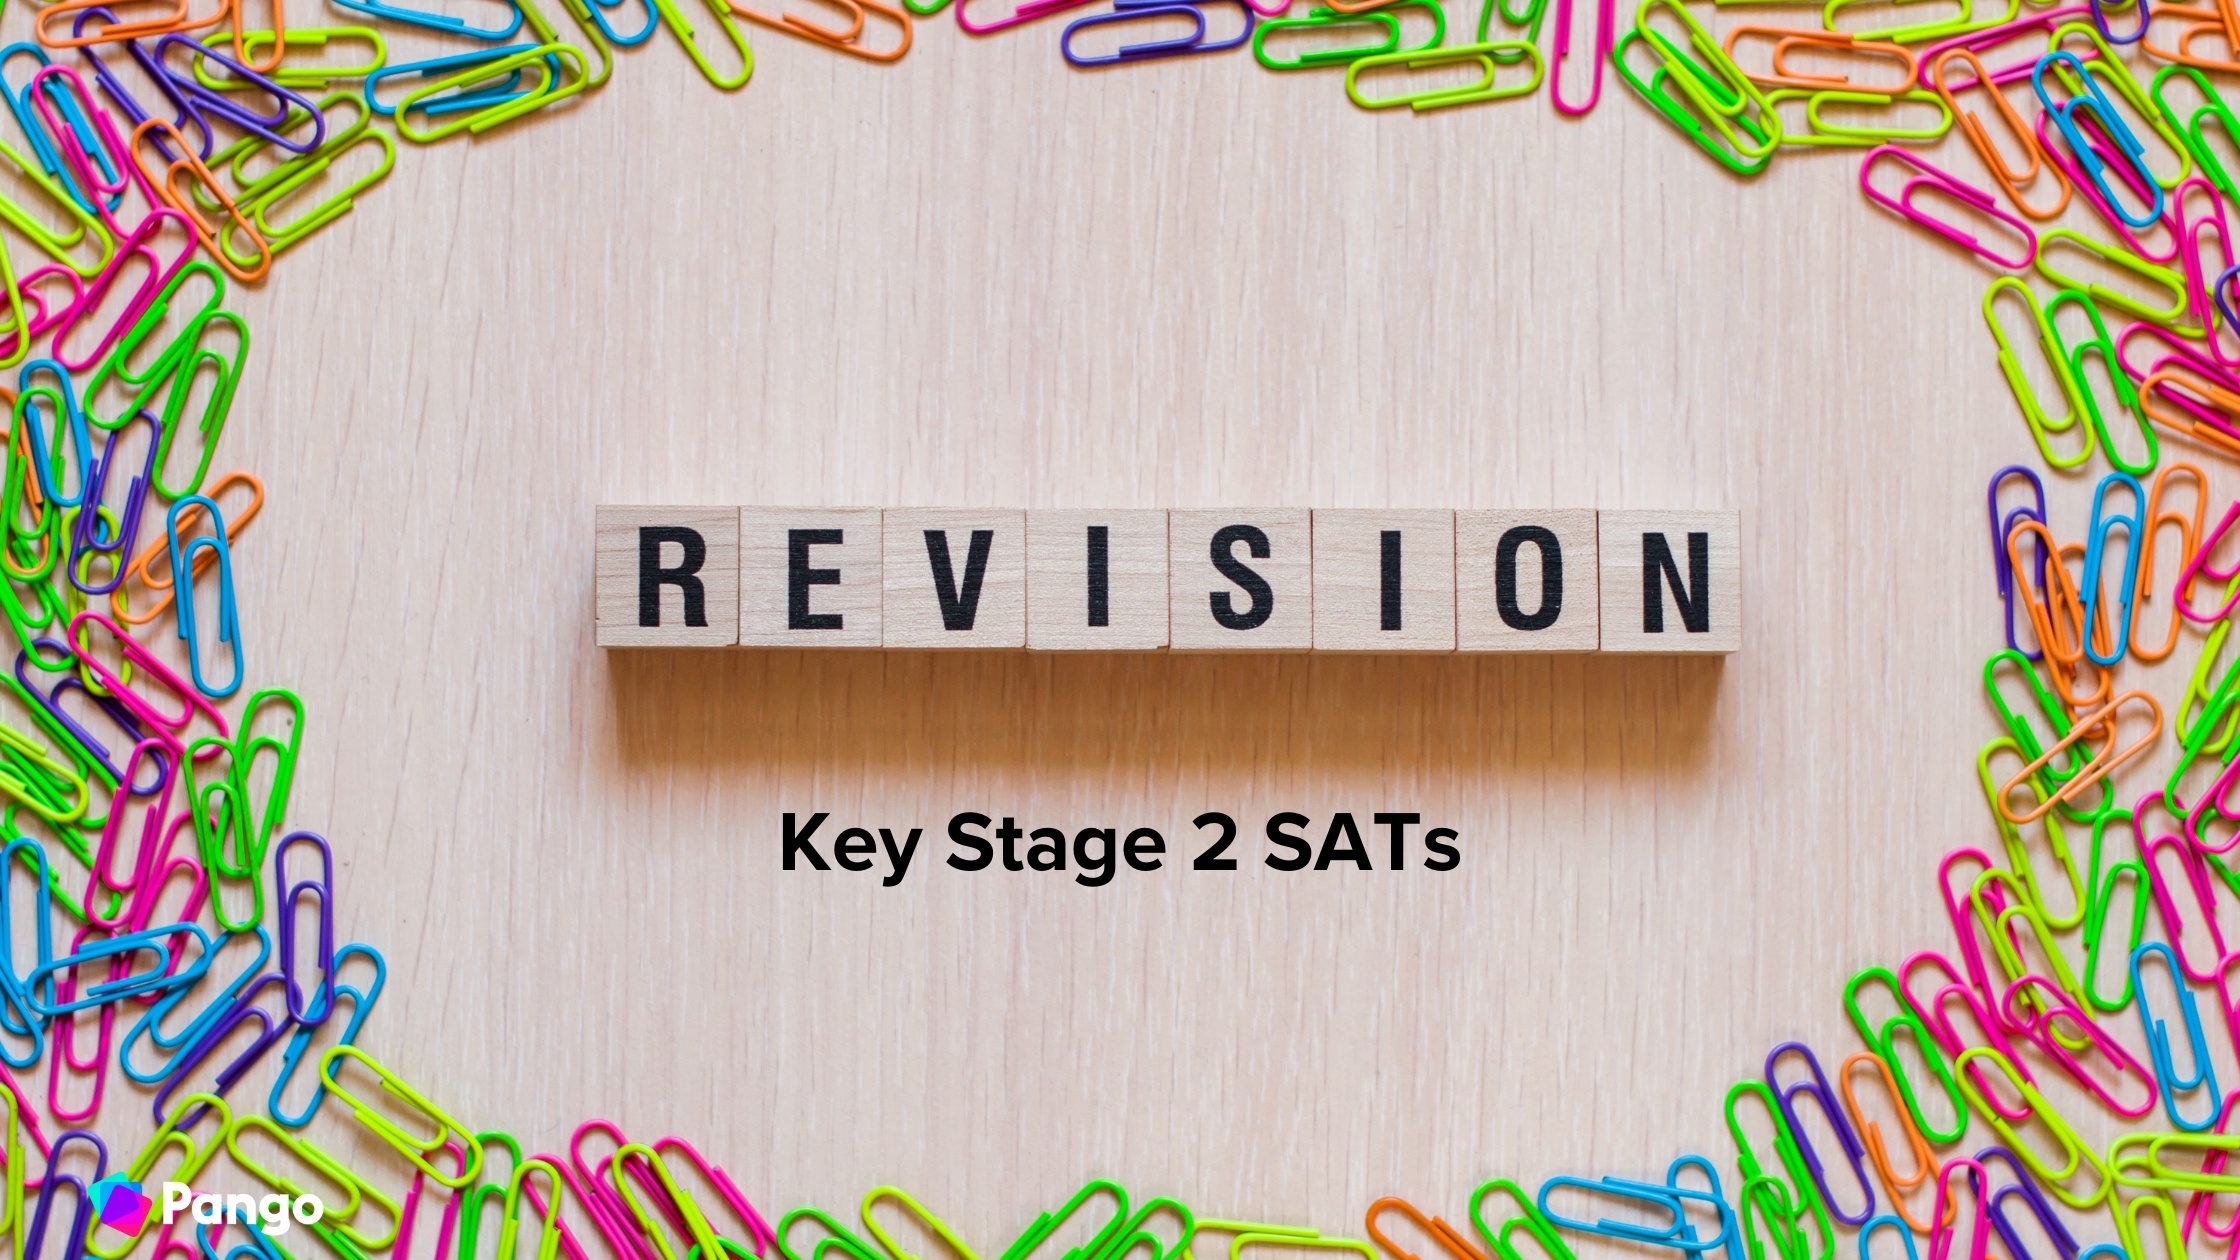 Key Stage 2 SATs Revision